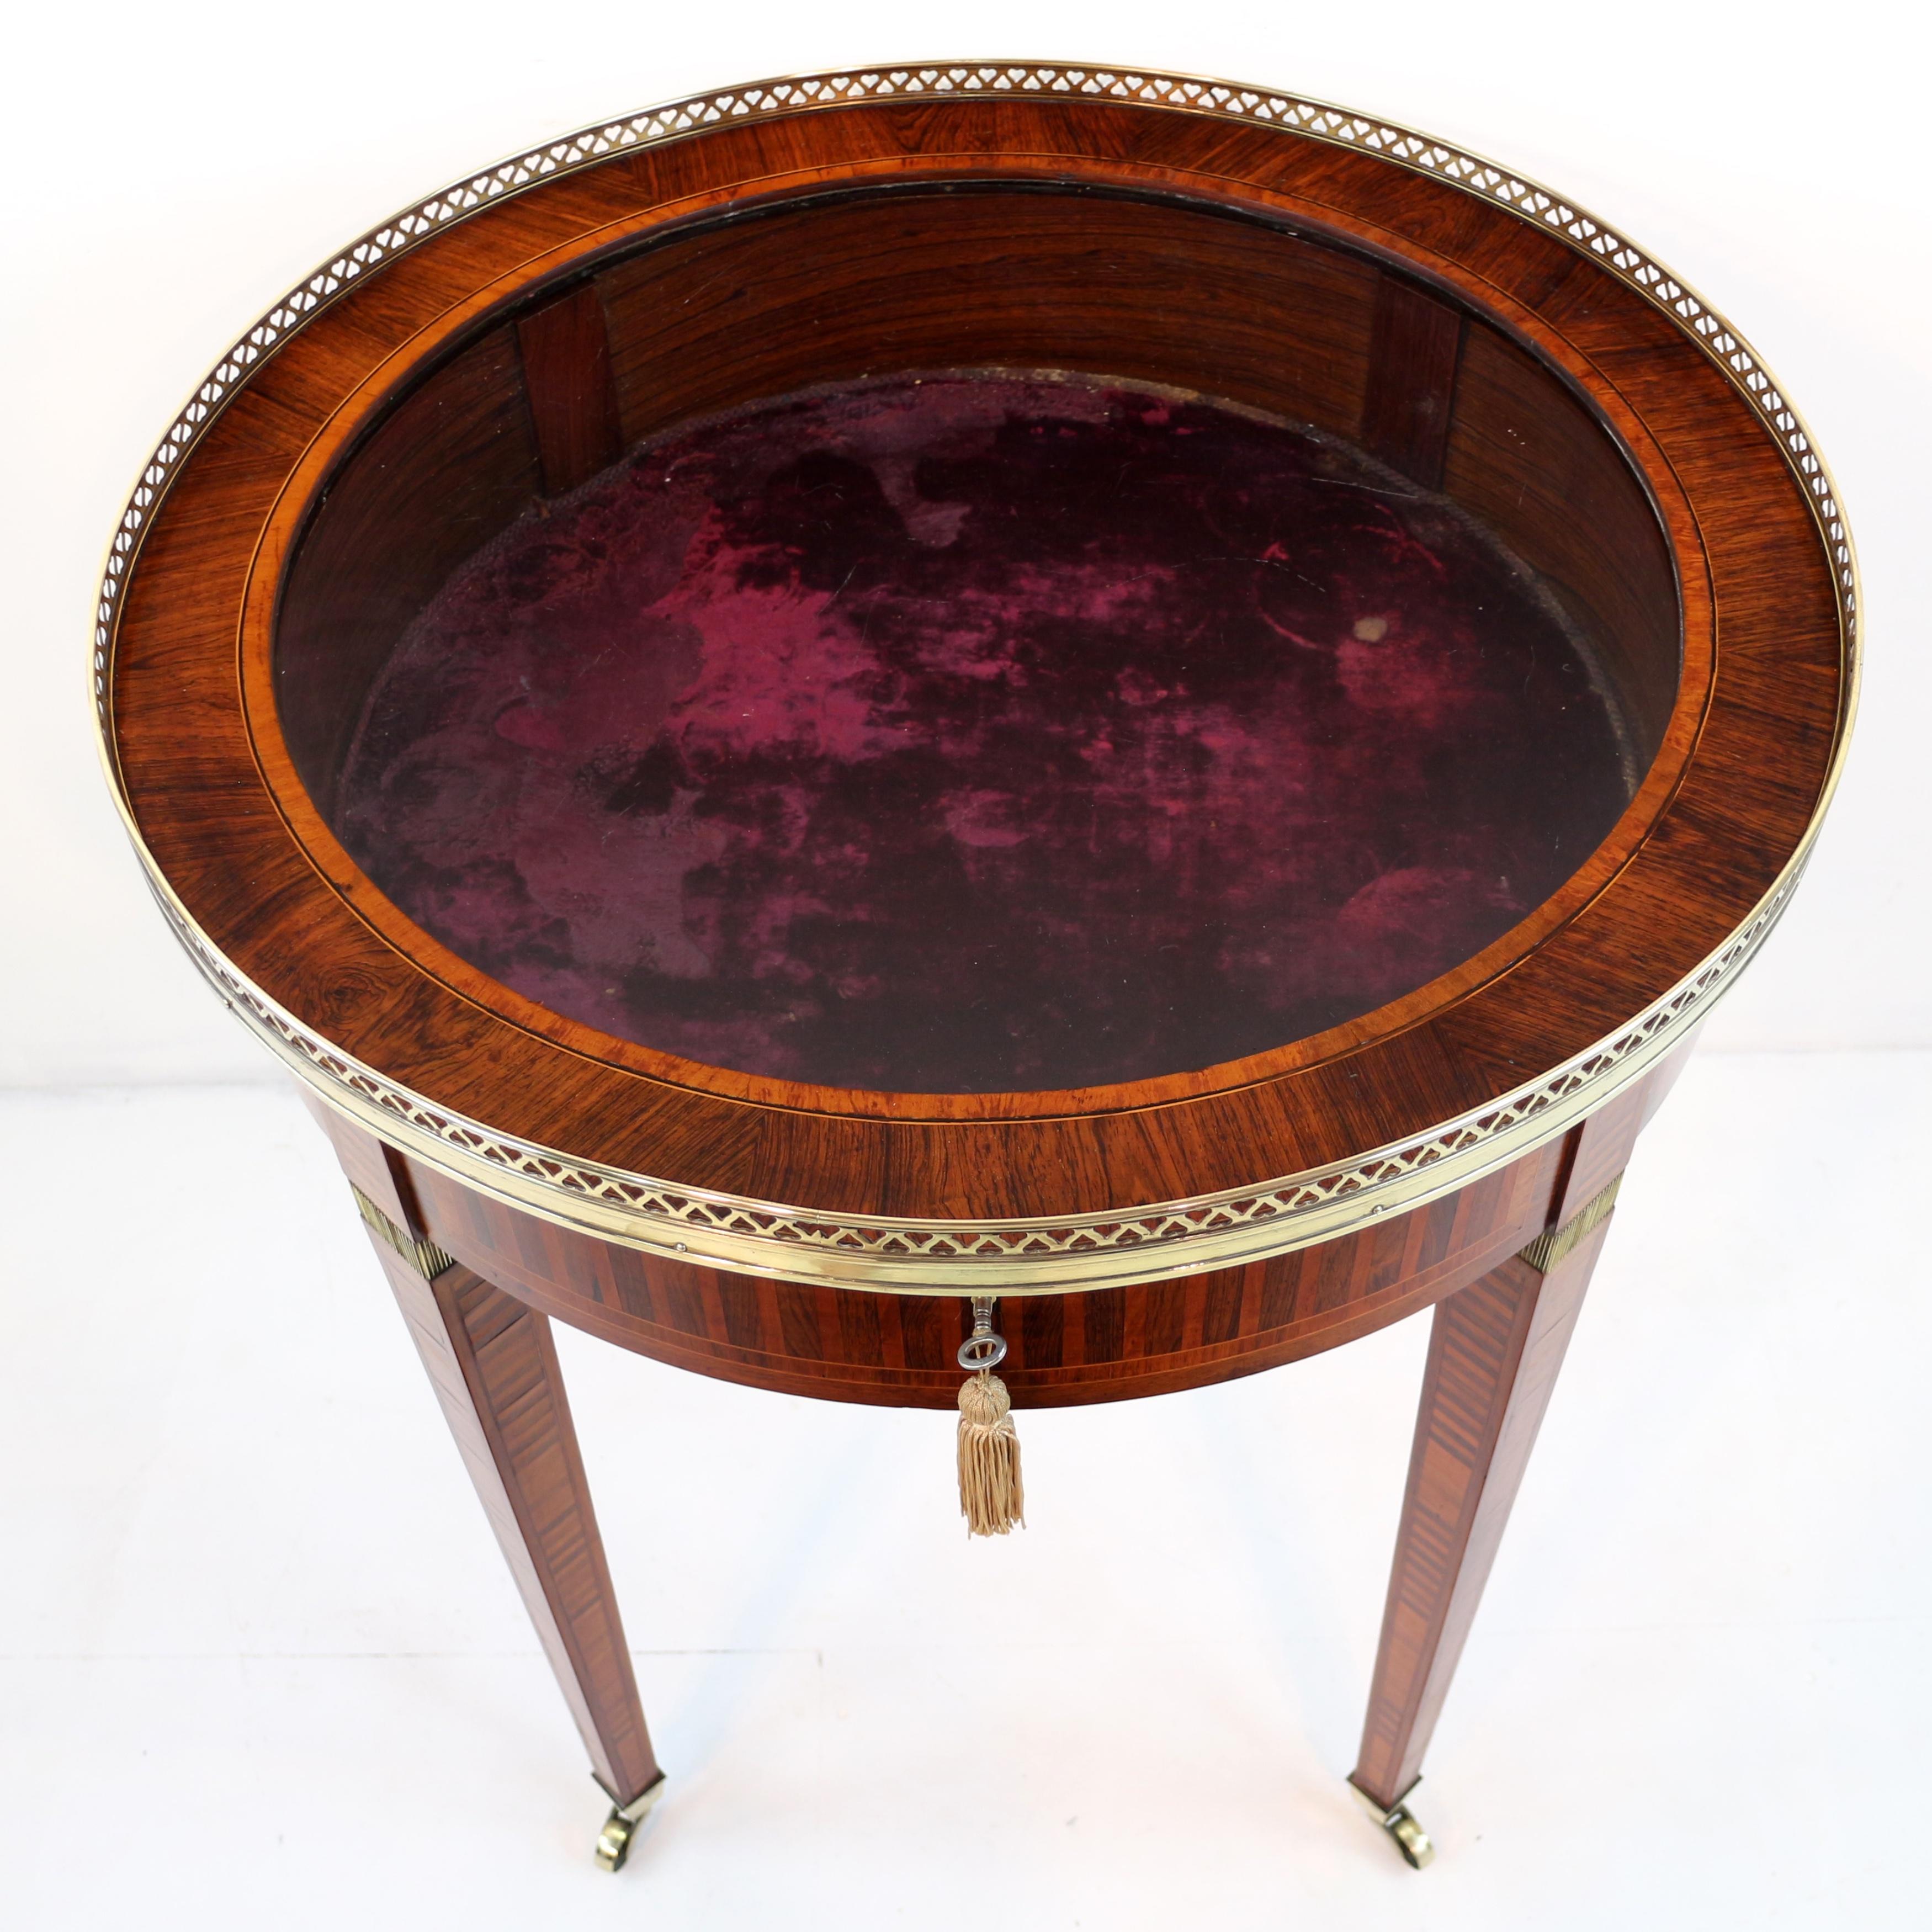 Antique English Victorian Sheraton Revival Rosewood & Parquetry Bijouterie Table For Sale 3